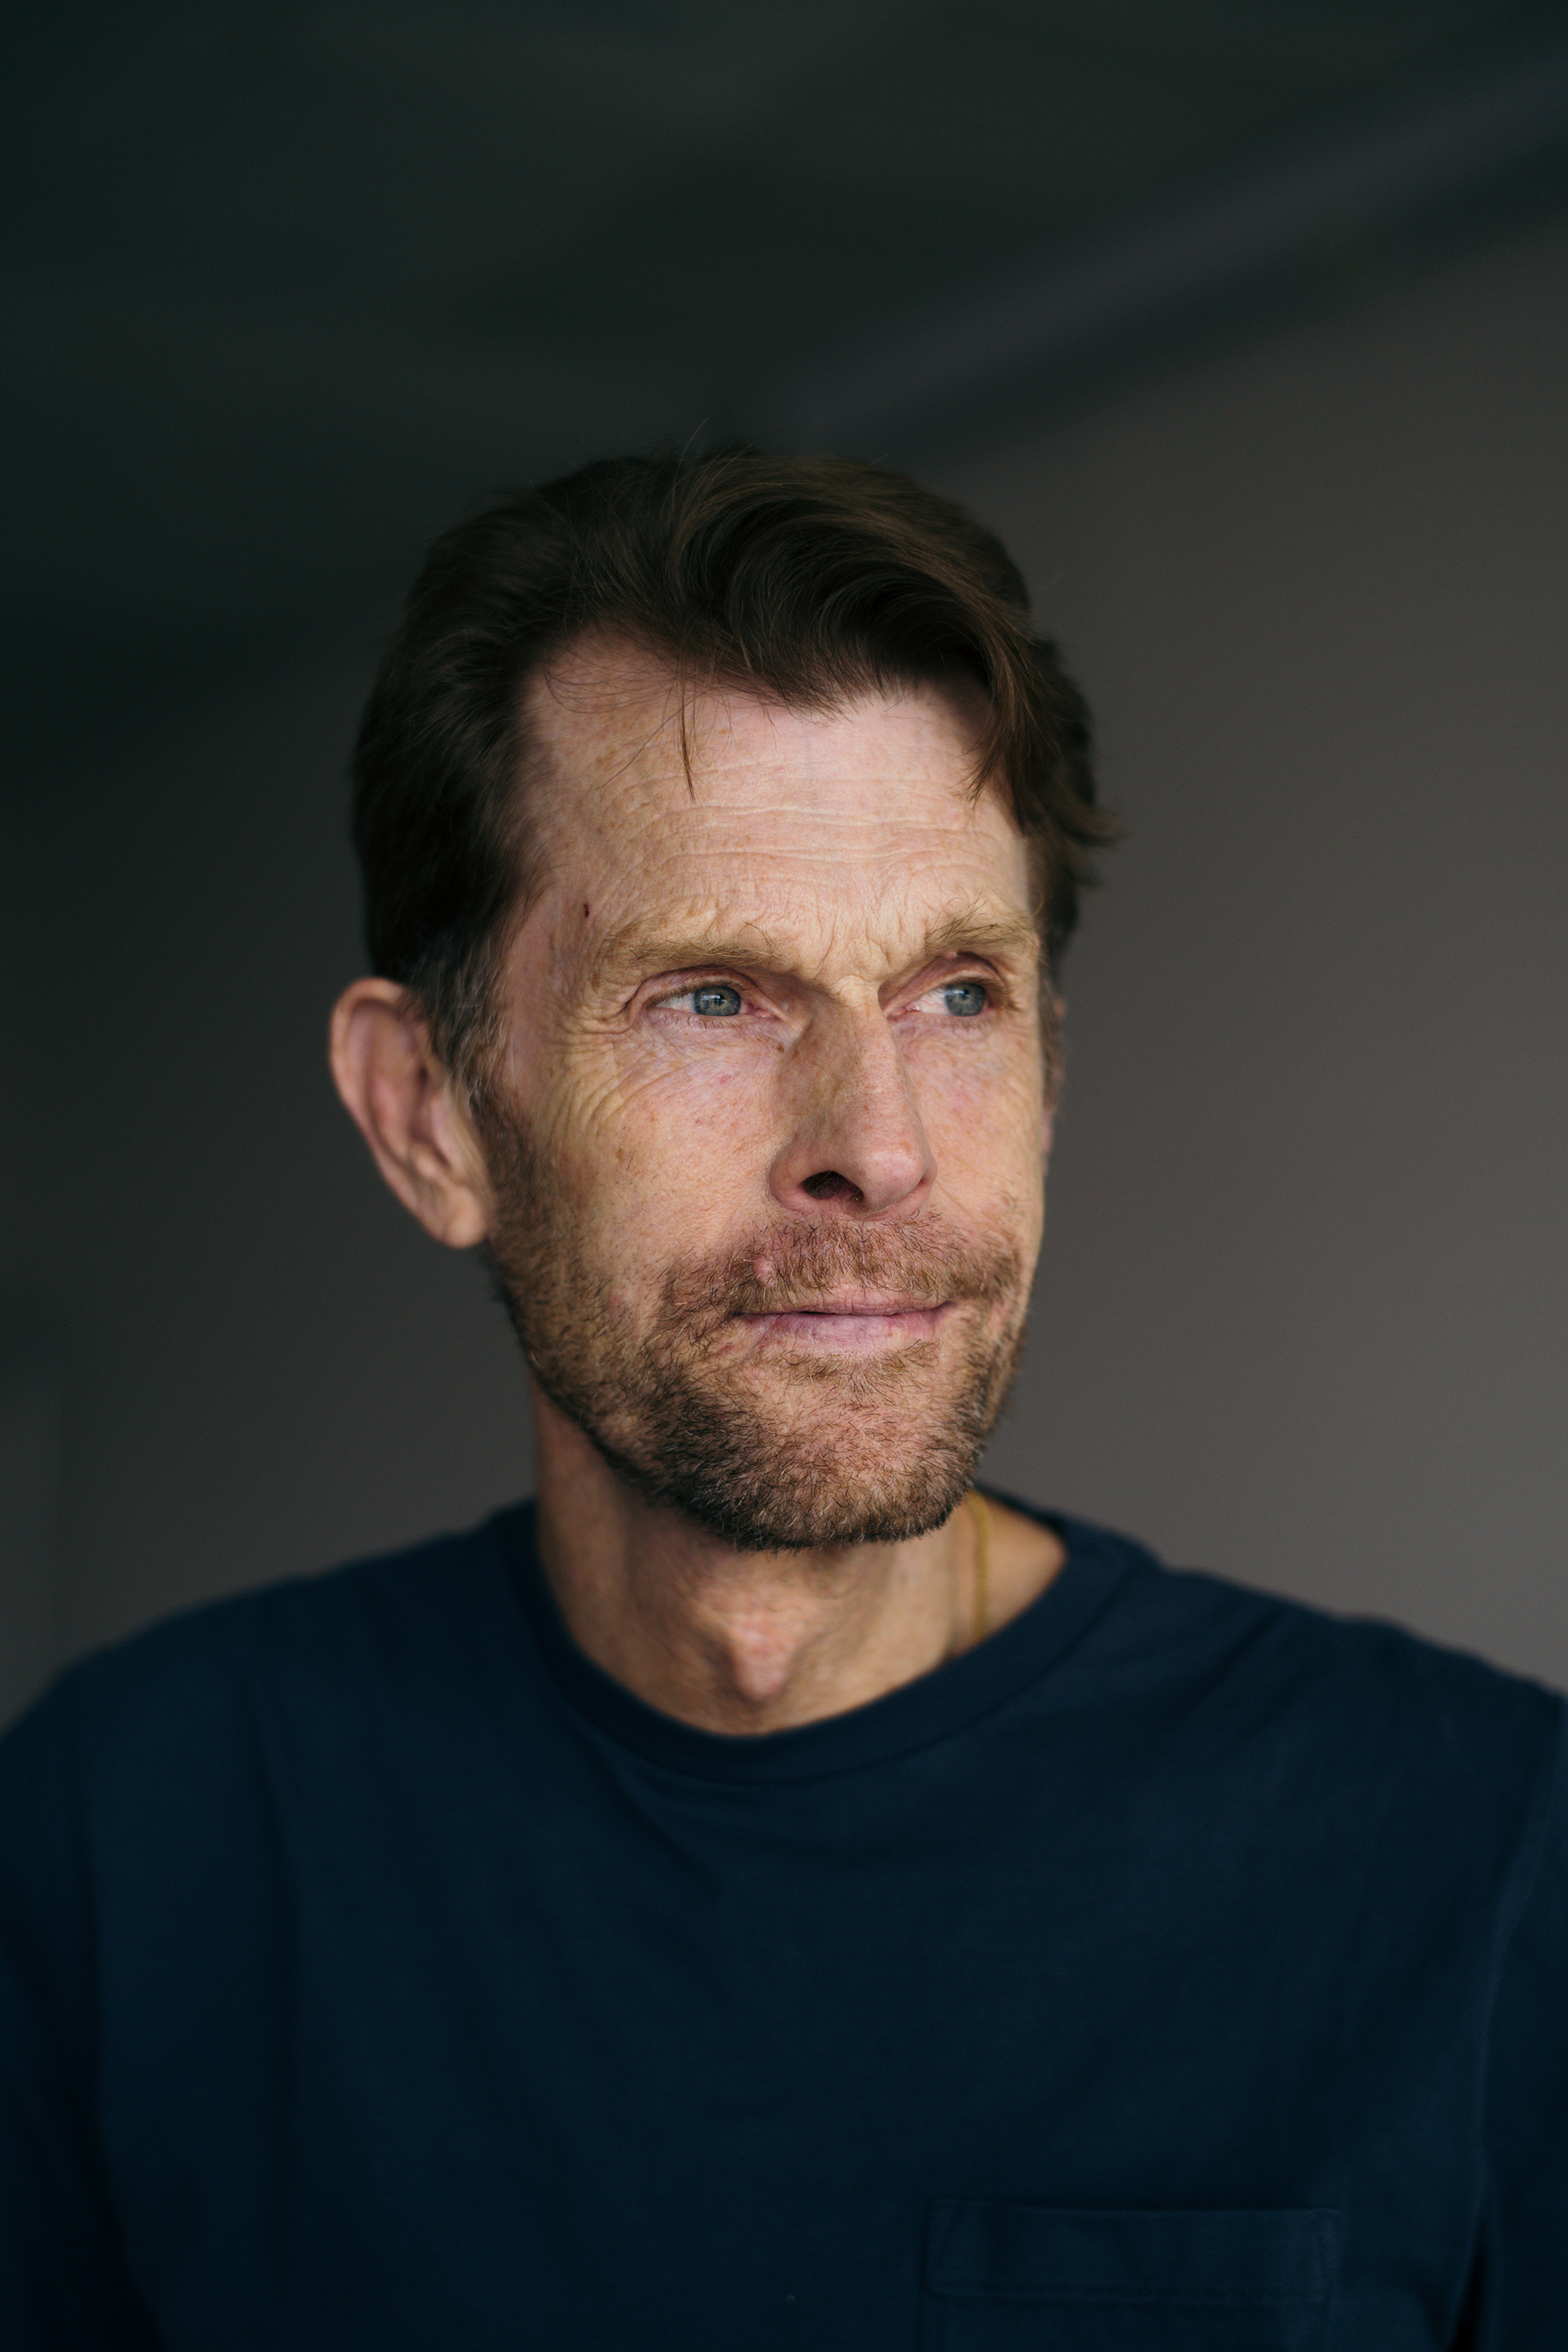 Kevin Conroy, The Golden Throats Wiki